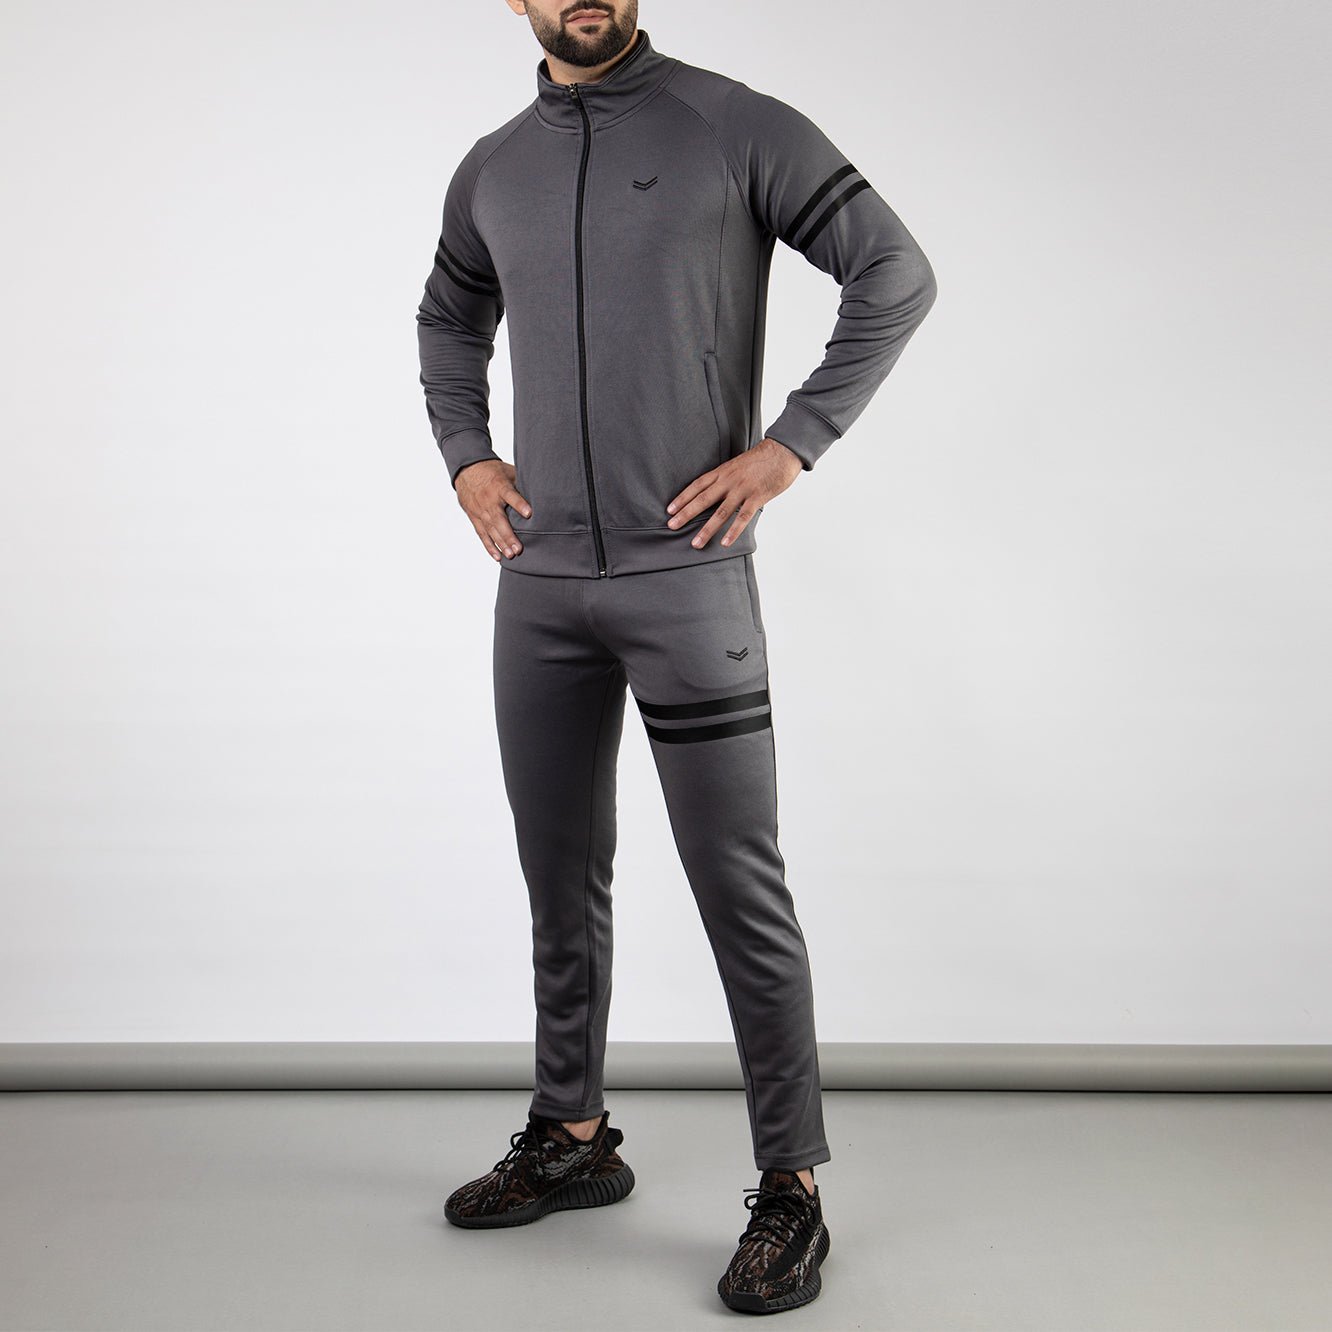 Gray Quick Dry Mock-Neck Tracksuit with Black Printed Stripes